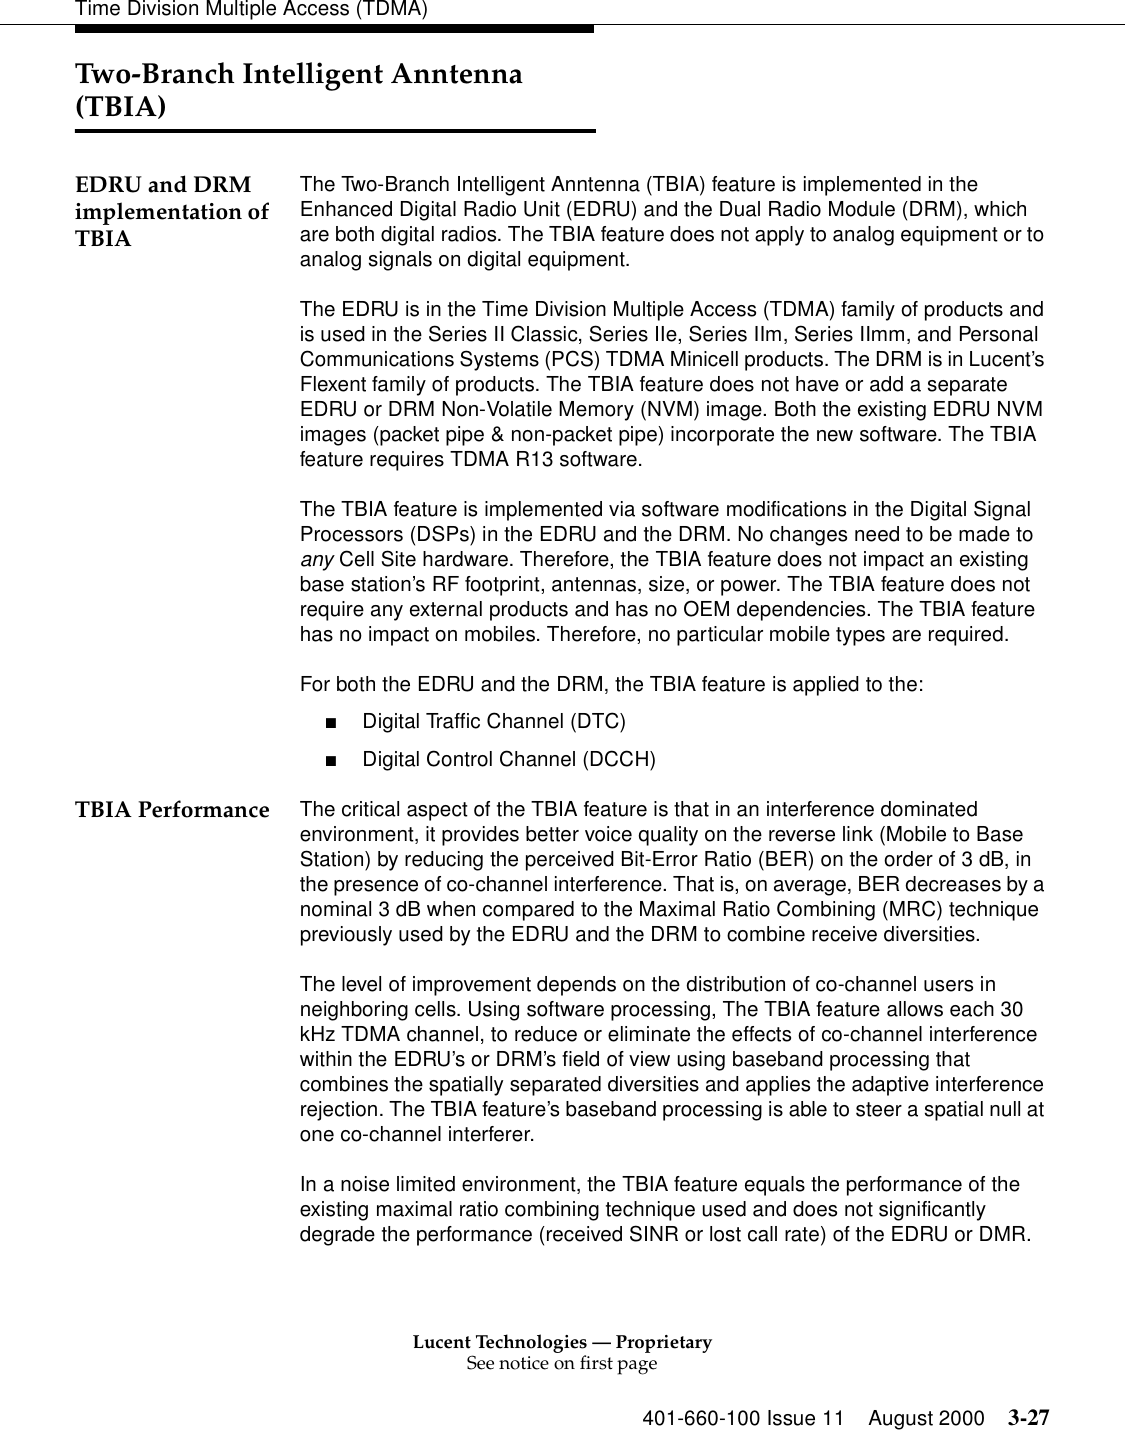 Lucent Technologies — ProprietarySee notice on first page401-660-100 Issue 11 August 2000 3-27Time Division Multiple Access (TDMA)Two-Branch Intelligent Anntenna (TBIA) EDRU and DRM implementation of TBIAThe Two-Branch Intelligent Anntenna (TBIA) feature is implemented in the Enhanced Digital Radio Unit (EDRU) and the Dual Radio Module (DRM), which are both digital radios. The TBIA feature does not apply to analog equipment or to analog signals on digital equipment. The EDRU is in the Time Division Multiple Access (TDMA) family of products and is used in the Series II Classic, Series IIe, Series IIm, Series IImm, and Personal Communications Systems (PCS) TDMA Minicell products. The DRM is in Lucent’s Flexent family of products. The TBIA feature does not have or add a separate EDRU or DRM Non-Volatile Memory (NVM) image. Both the existing EDRU NVM images (packet pipe &amp; non-packet pipe) incorporate the new software. The TBIA feature requires TDMA R13 software.The TBIA feature is implemented via software modifications in the Digital Signal Processors (DSPs) in the EDRU and the DRM. No changes need to be made to any Cell Site hardware. Therefore, the TBIA feature does not impact an existing base station’s RF footprint, antennas, size, or power. The TBIA feature does not require any external products and has no OEM dependencies. The TBIA feature has no impact on mobiles. Therefore, no particular mobile types are required.For both the EDRU and the DRM, the TBIA feature is applied to the:■Digital Traffic Channel (DTC)■Digital Control Channel (DCCH)TBIA Performance The critical aspect of the TBIA feature is that in an interference dominated environment, it provides better voice quality on the reverse link (Mobile to Base Station) by reducing the perceived Bit-Error Ratio (BER) on the order of 3 dB, in the presence of co-channel interference. That is, on average, BER decreases by a nominal 3 dB when compared to the Maximal Ratio Combining (MRC) technique previously used by the EDRU and the DRM to combine receive diversities.The level of improvement depends on the distribution of co-channel users in neighboring cells. Using software processing, The TBIA feature allows each 30 kHz TDMA channel, to reduce or eliminate the effects of co-channel interference within the EDRU’s or DRM’s field of view using baseband processing that combines the spatially separated diversities and applies the adaptive interference rejection. The TBIA feature’s baseband processing is able to steer a spatial null at one co-channel interferer.In a noise limited environment, the TBIA feature equals the performance of the existing maximal ratio combining technique used and does not significantly degrade the performance (received SINR or lost call rate) of the EDRU or DMR. 